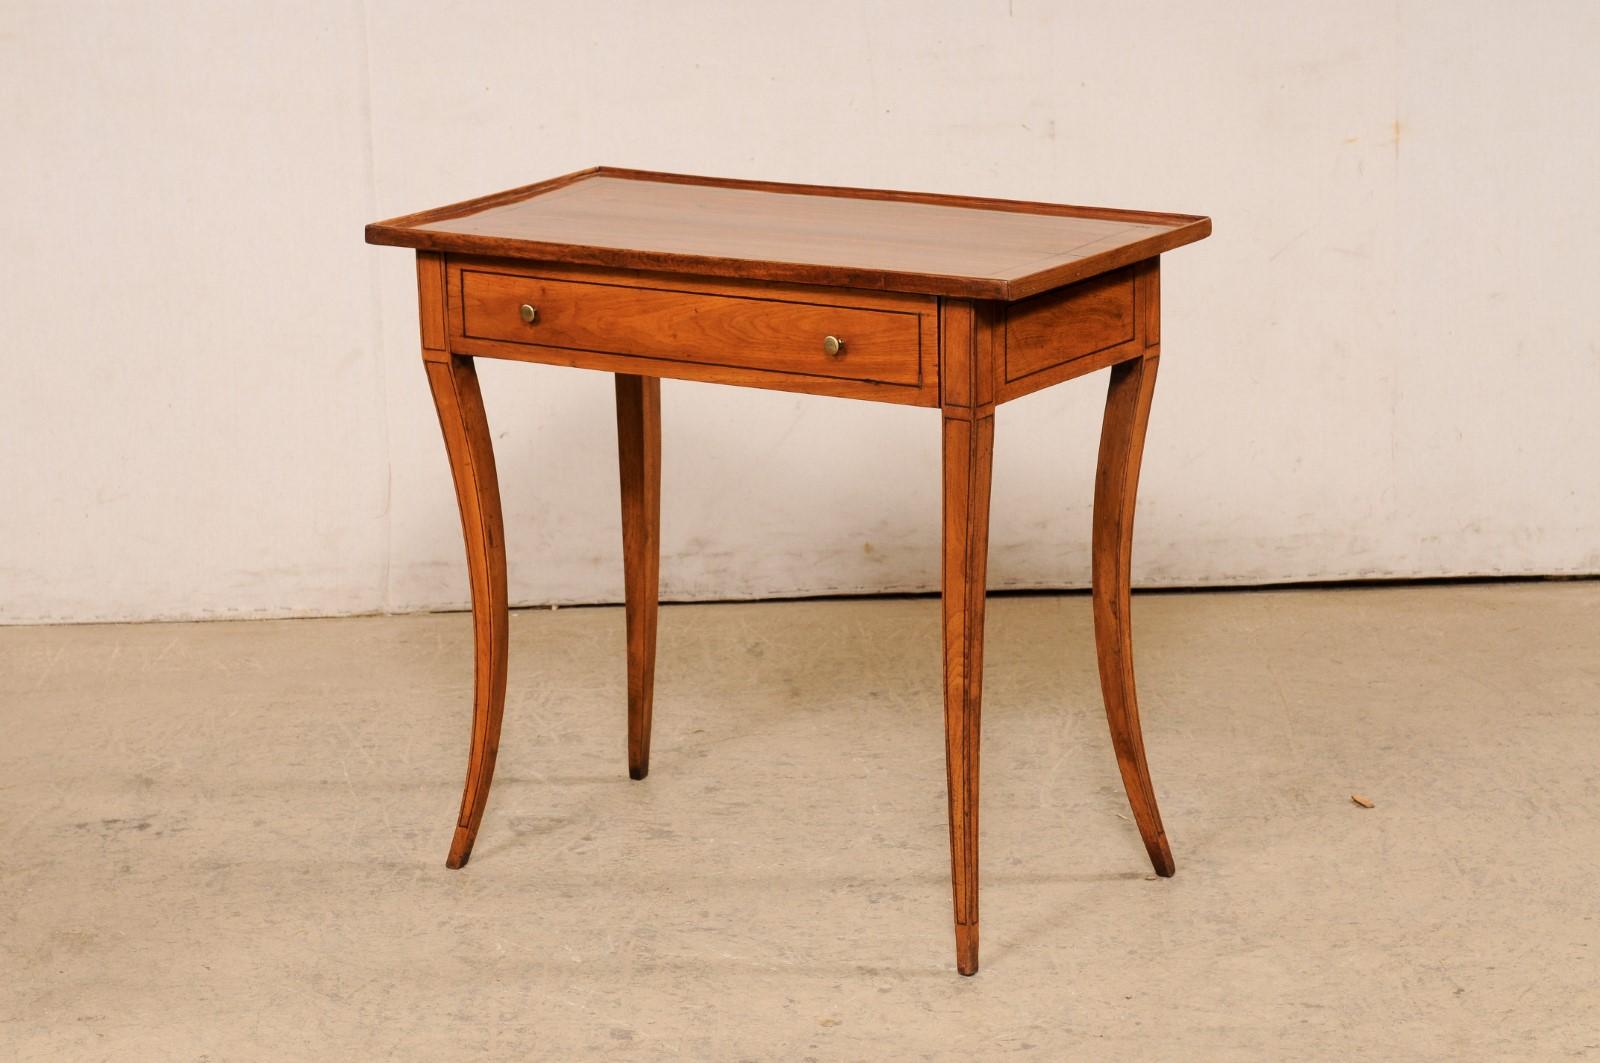 An Early 19th C. Italian Occasional Table w/Inlay Accents & Elegant Sabre Legs For Sale 6